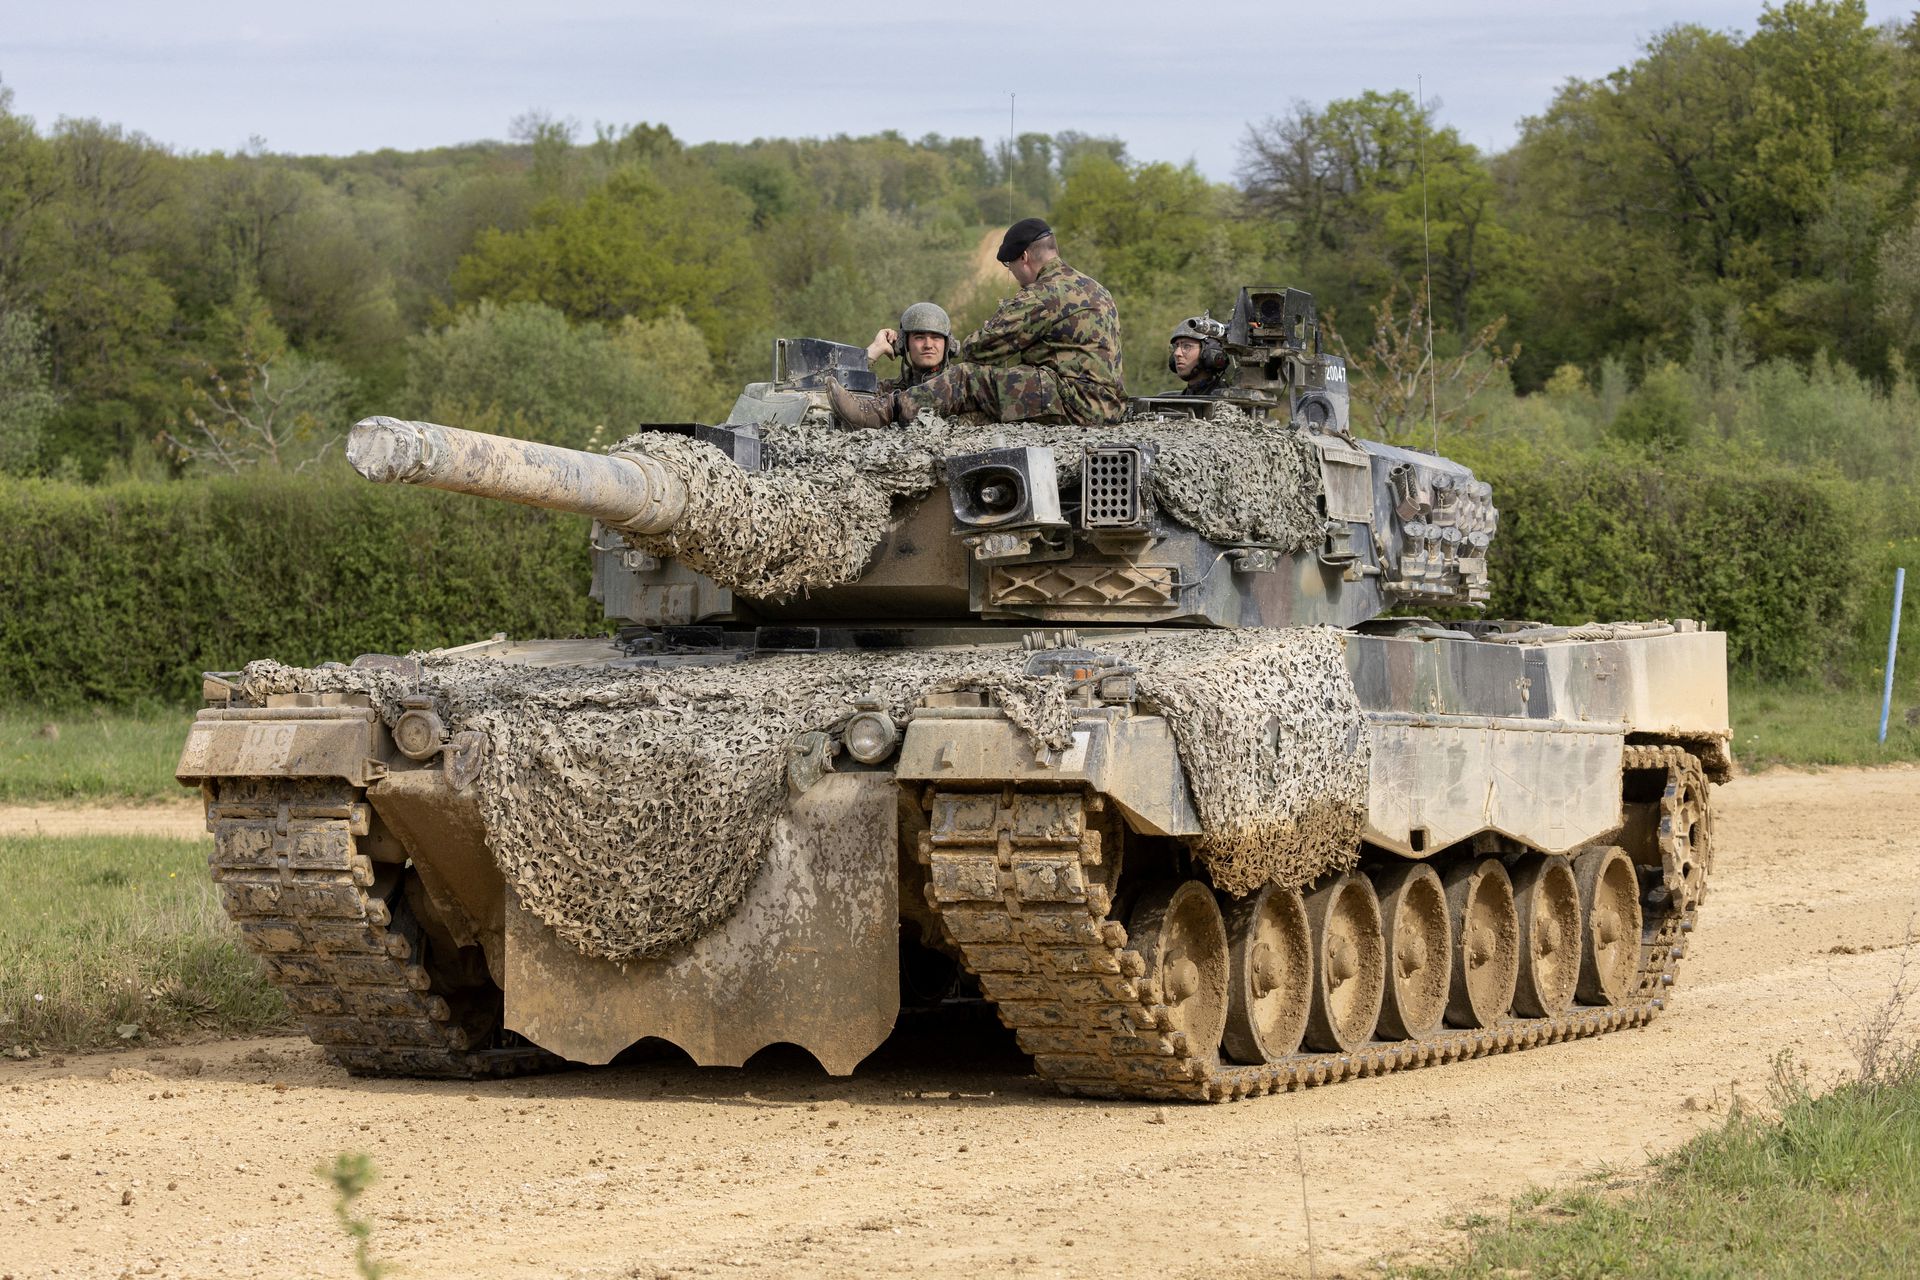 Switzerland will sell 25 Leopard 2 tanks to Germany, then they can be transferred to Ukraine